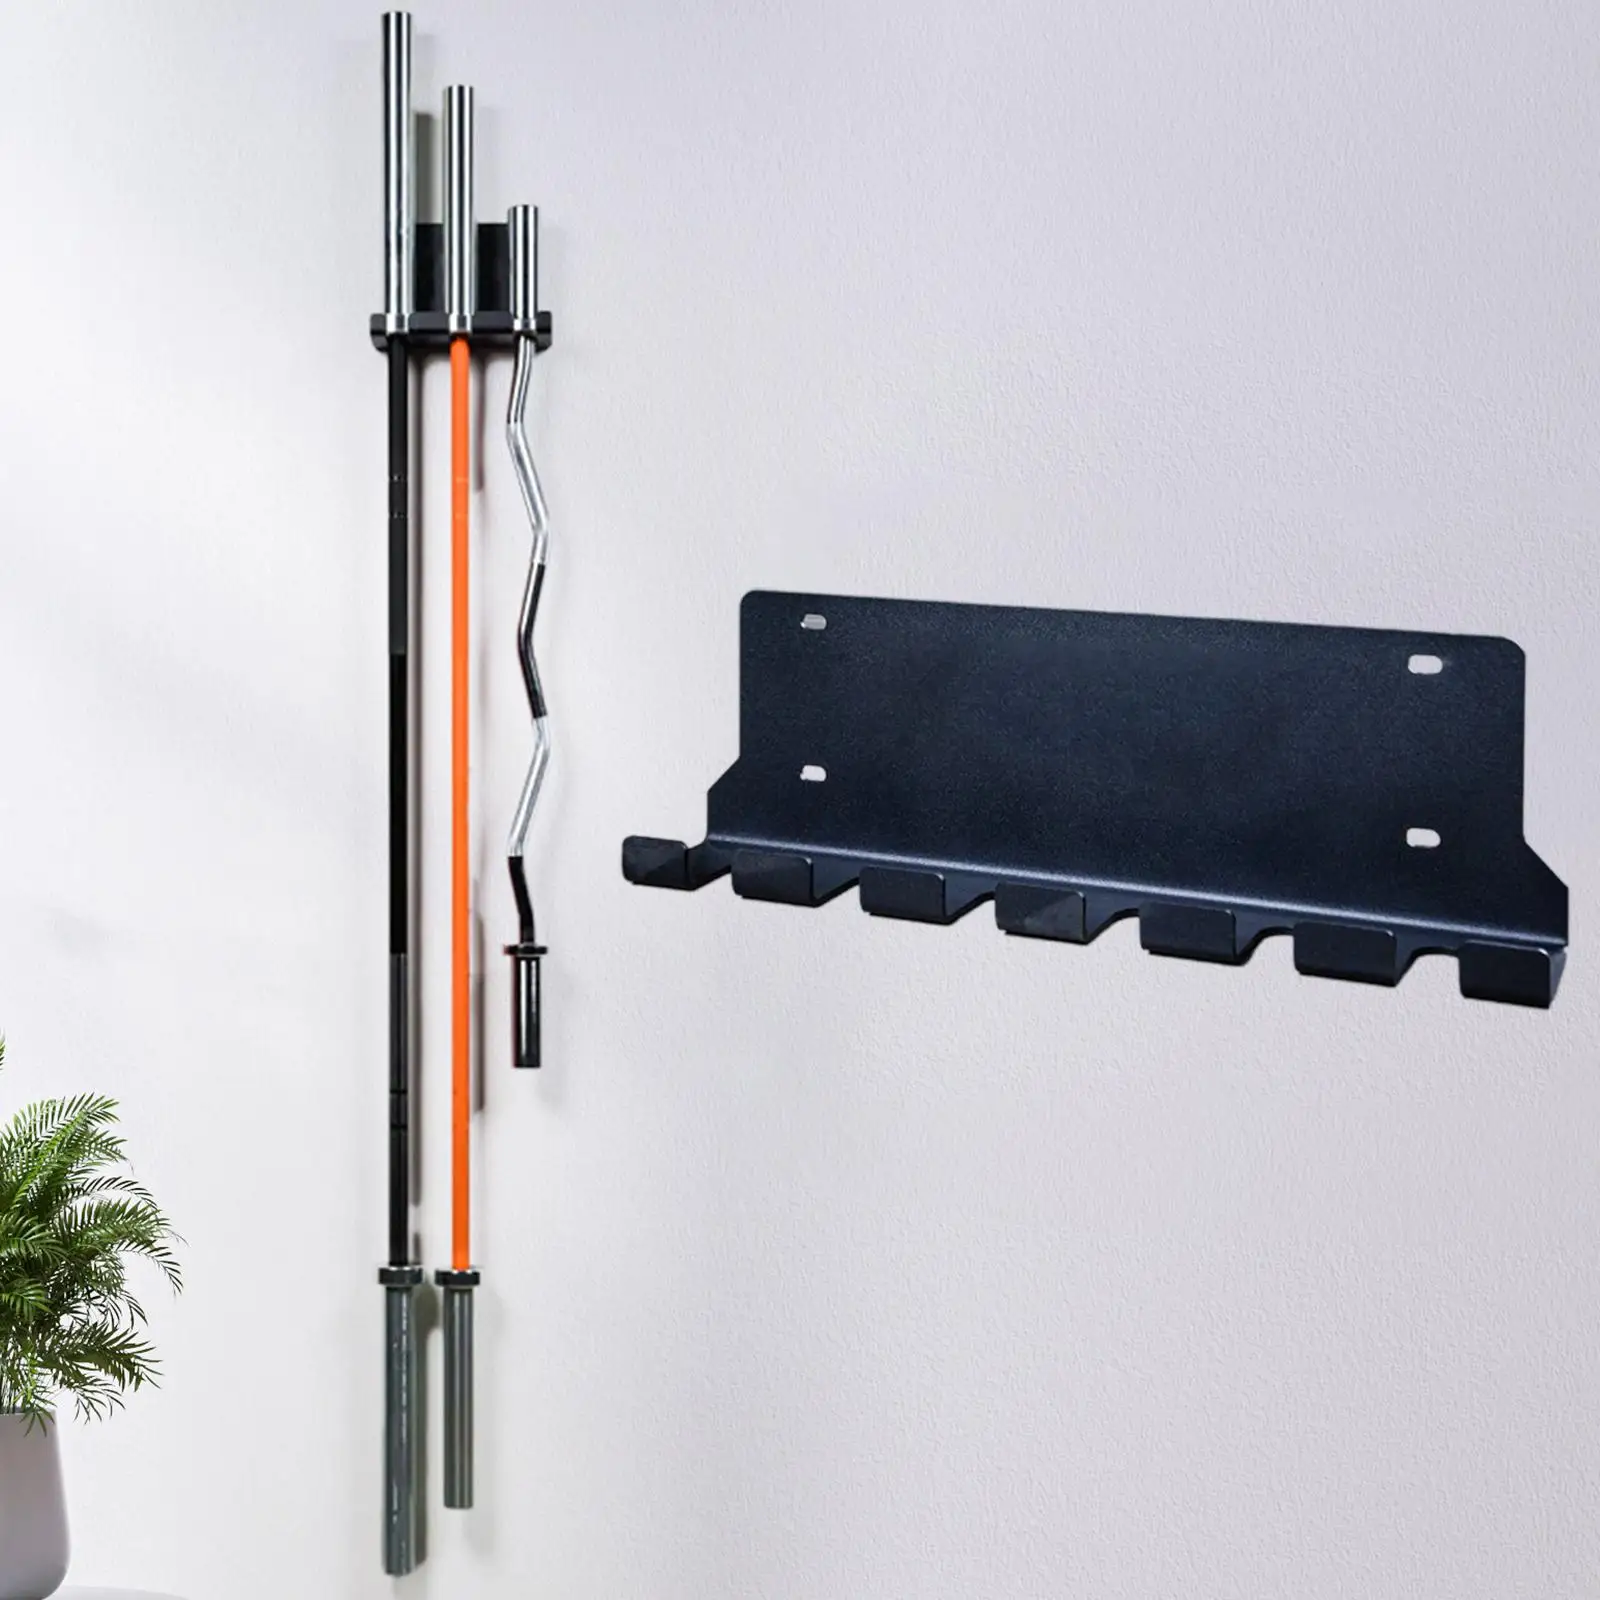 Barbell Storage Holder Rack Display Wall Mount Wall Hanger for Workout Equipment